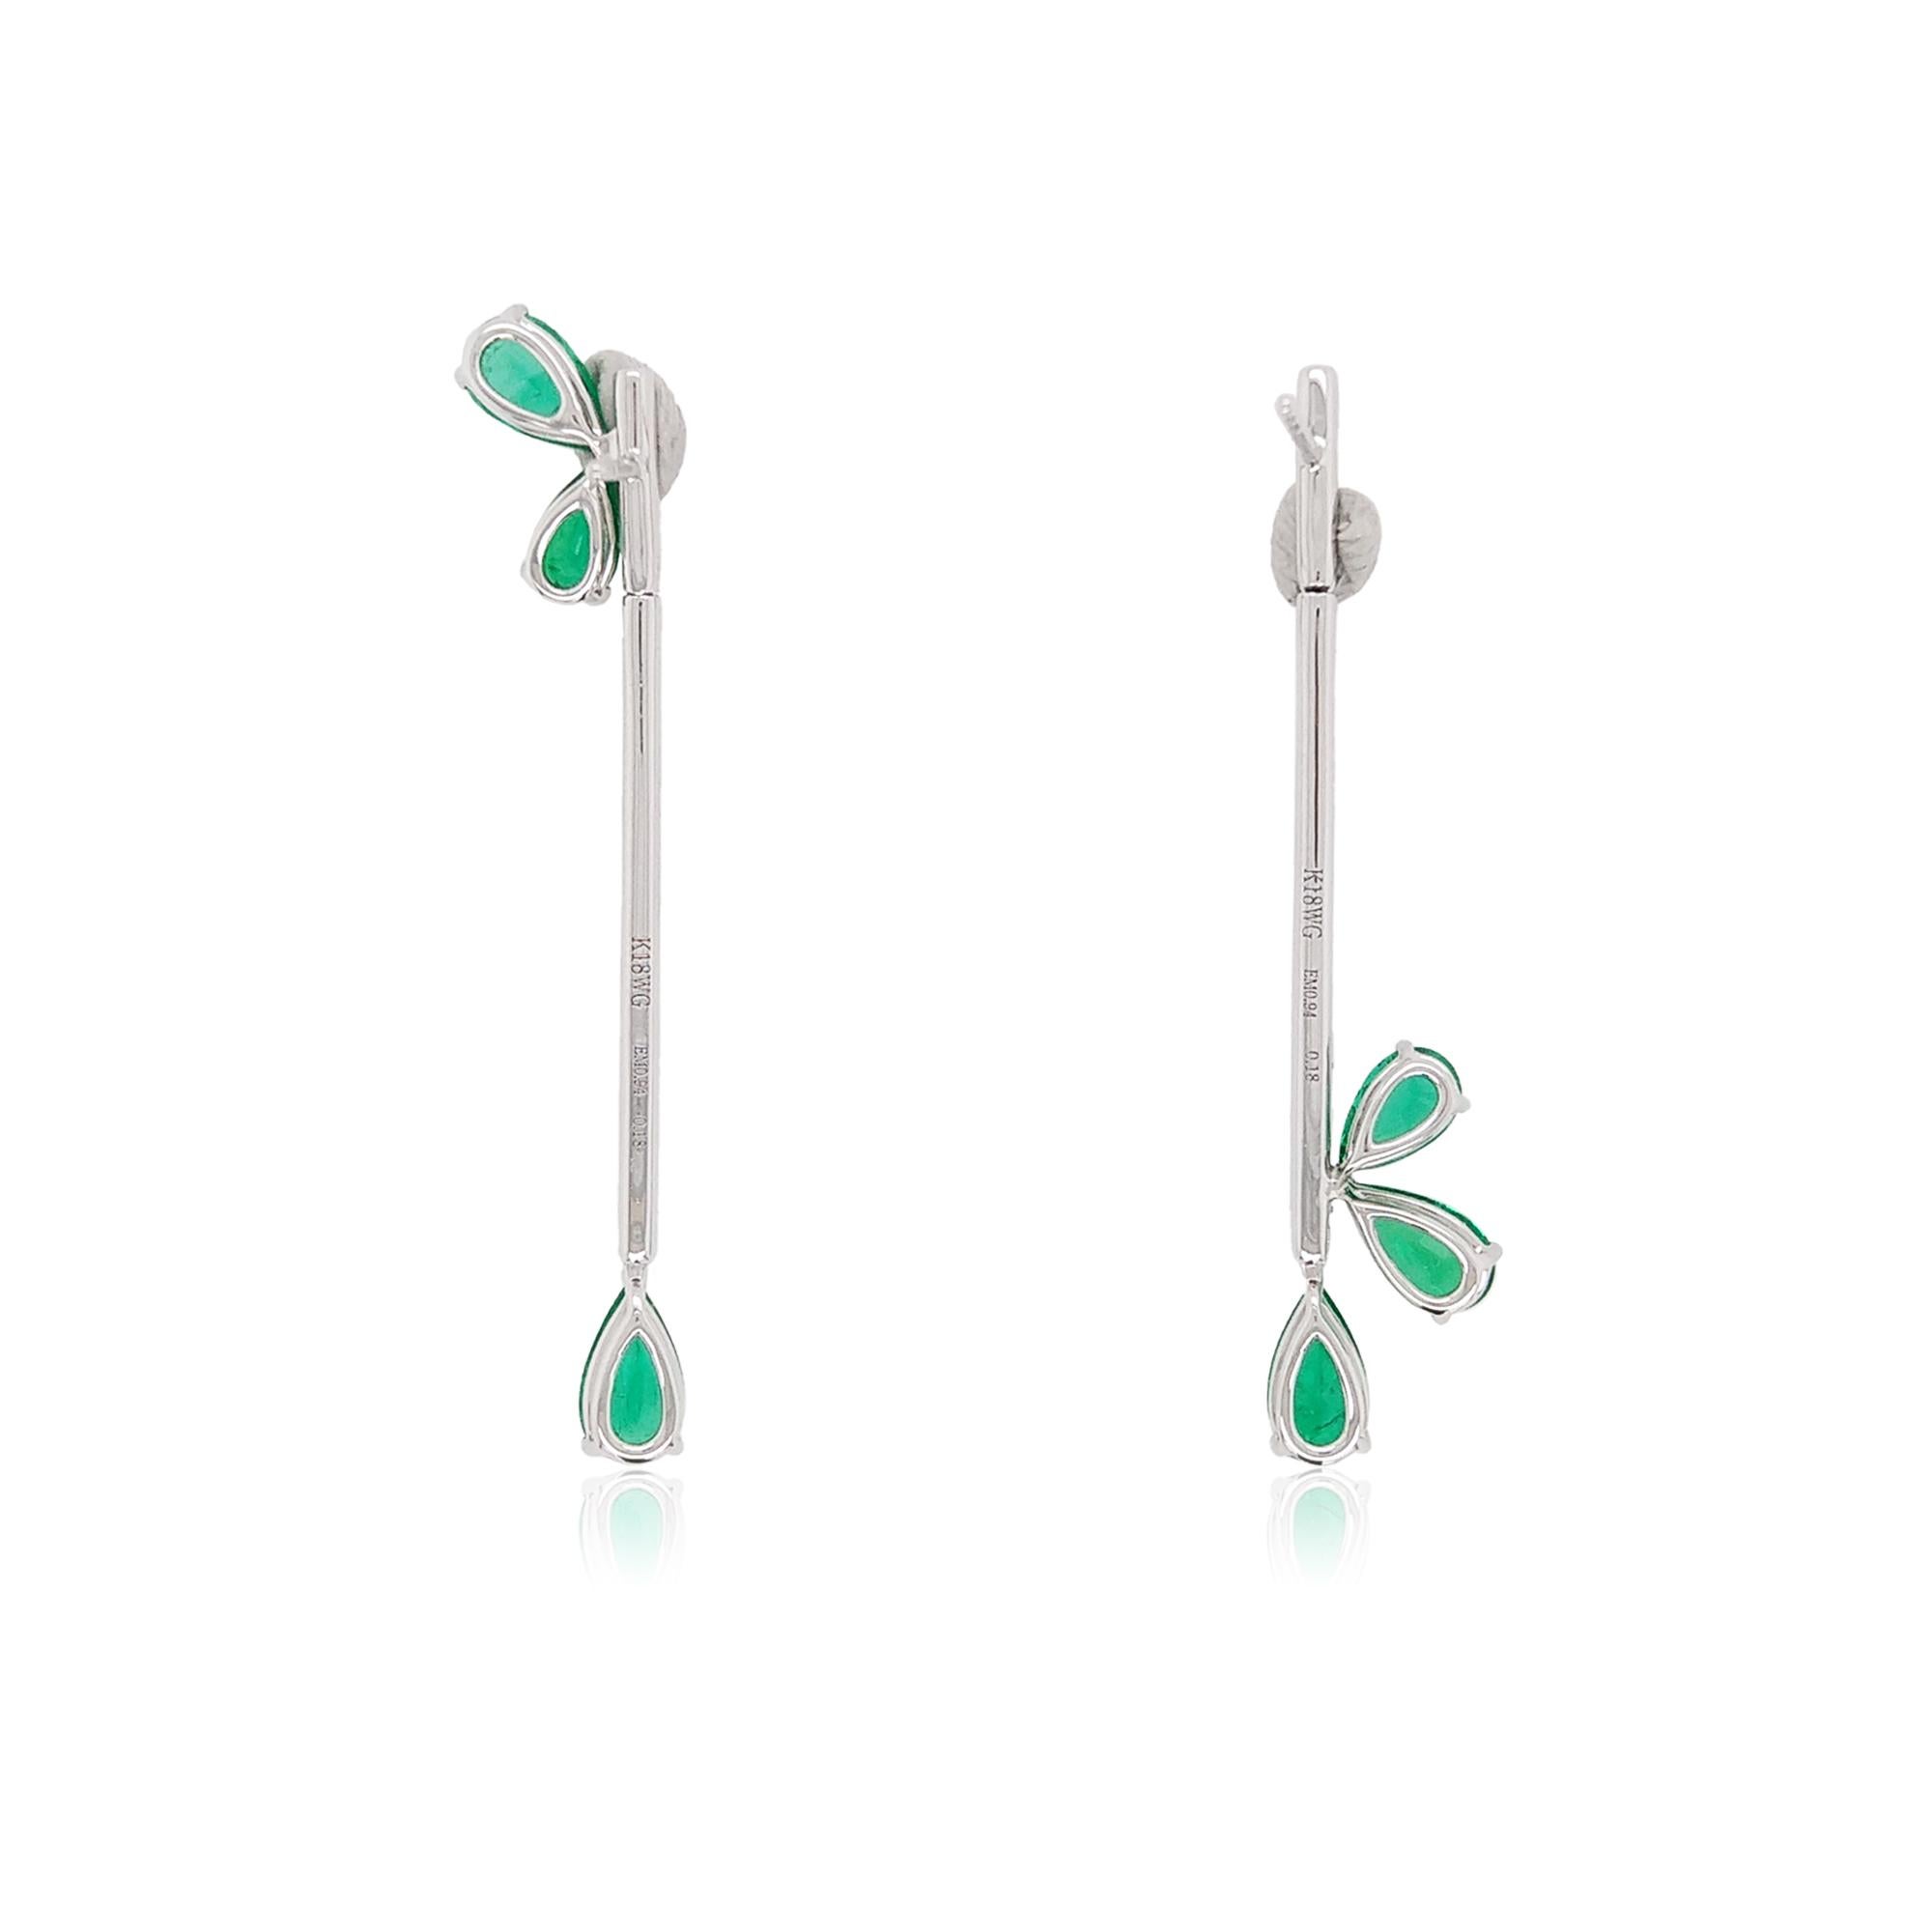 These elegant earrings feature superior rich color Colombian Emerald with a dazzling arrangement of White Diamonds. Striking and sophisticated, these earrings will add a touch of glamour to any outfit.
-	Pear Shape Colombian Emeralds total 1.88